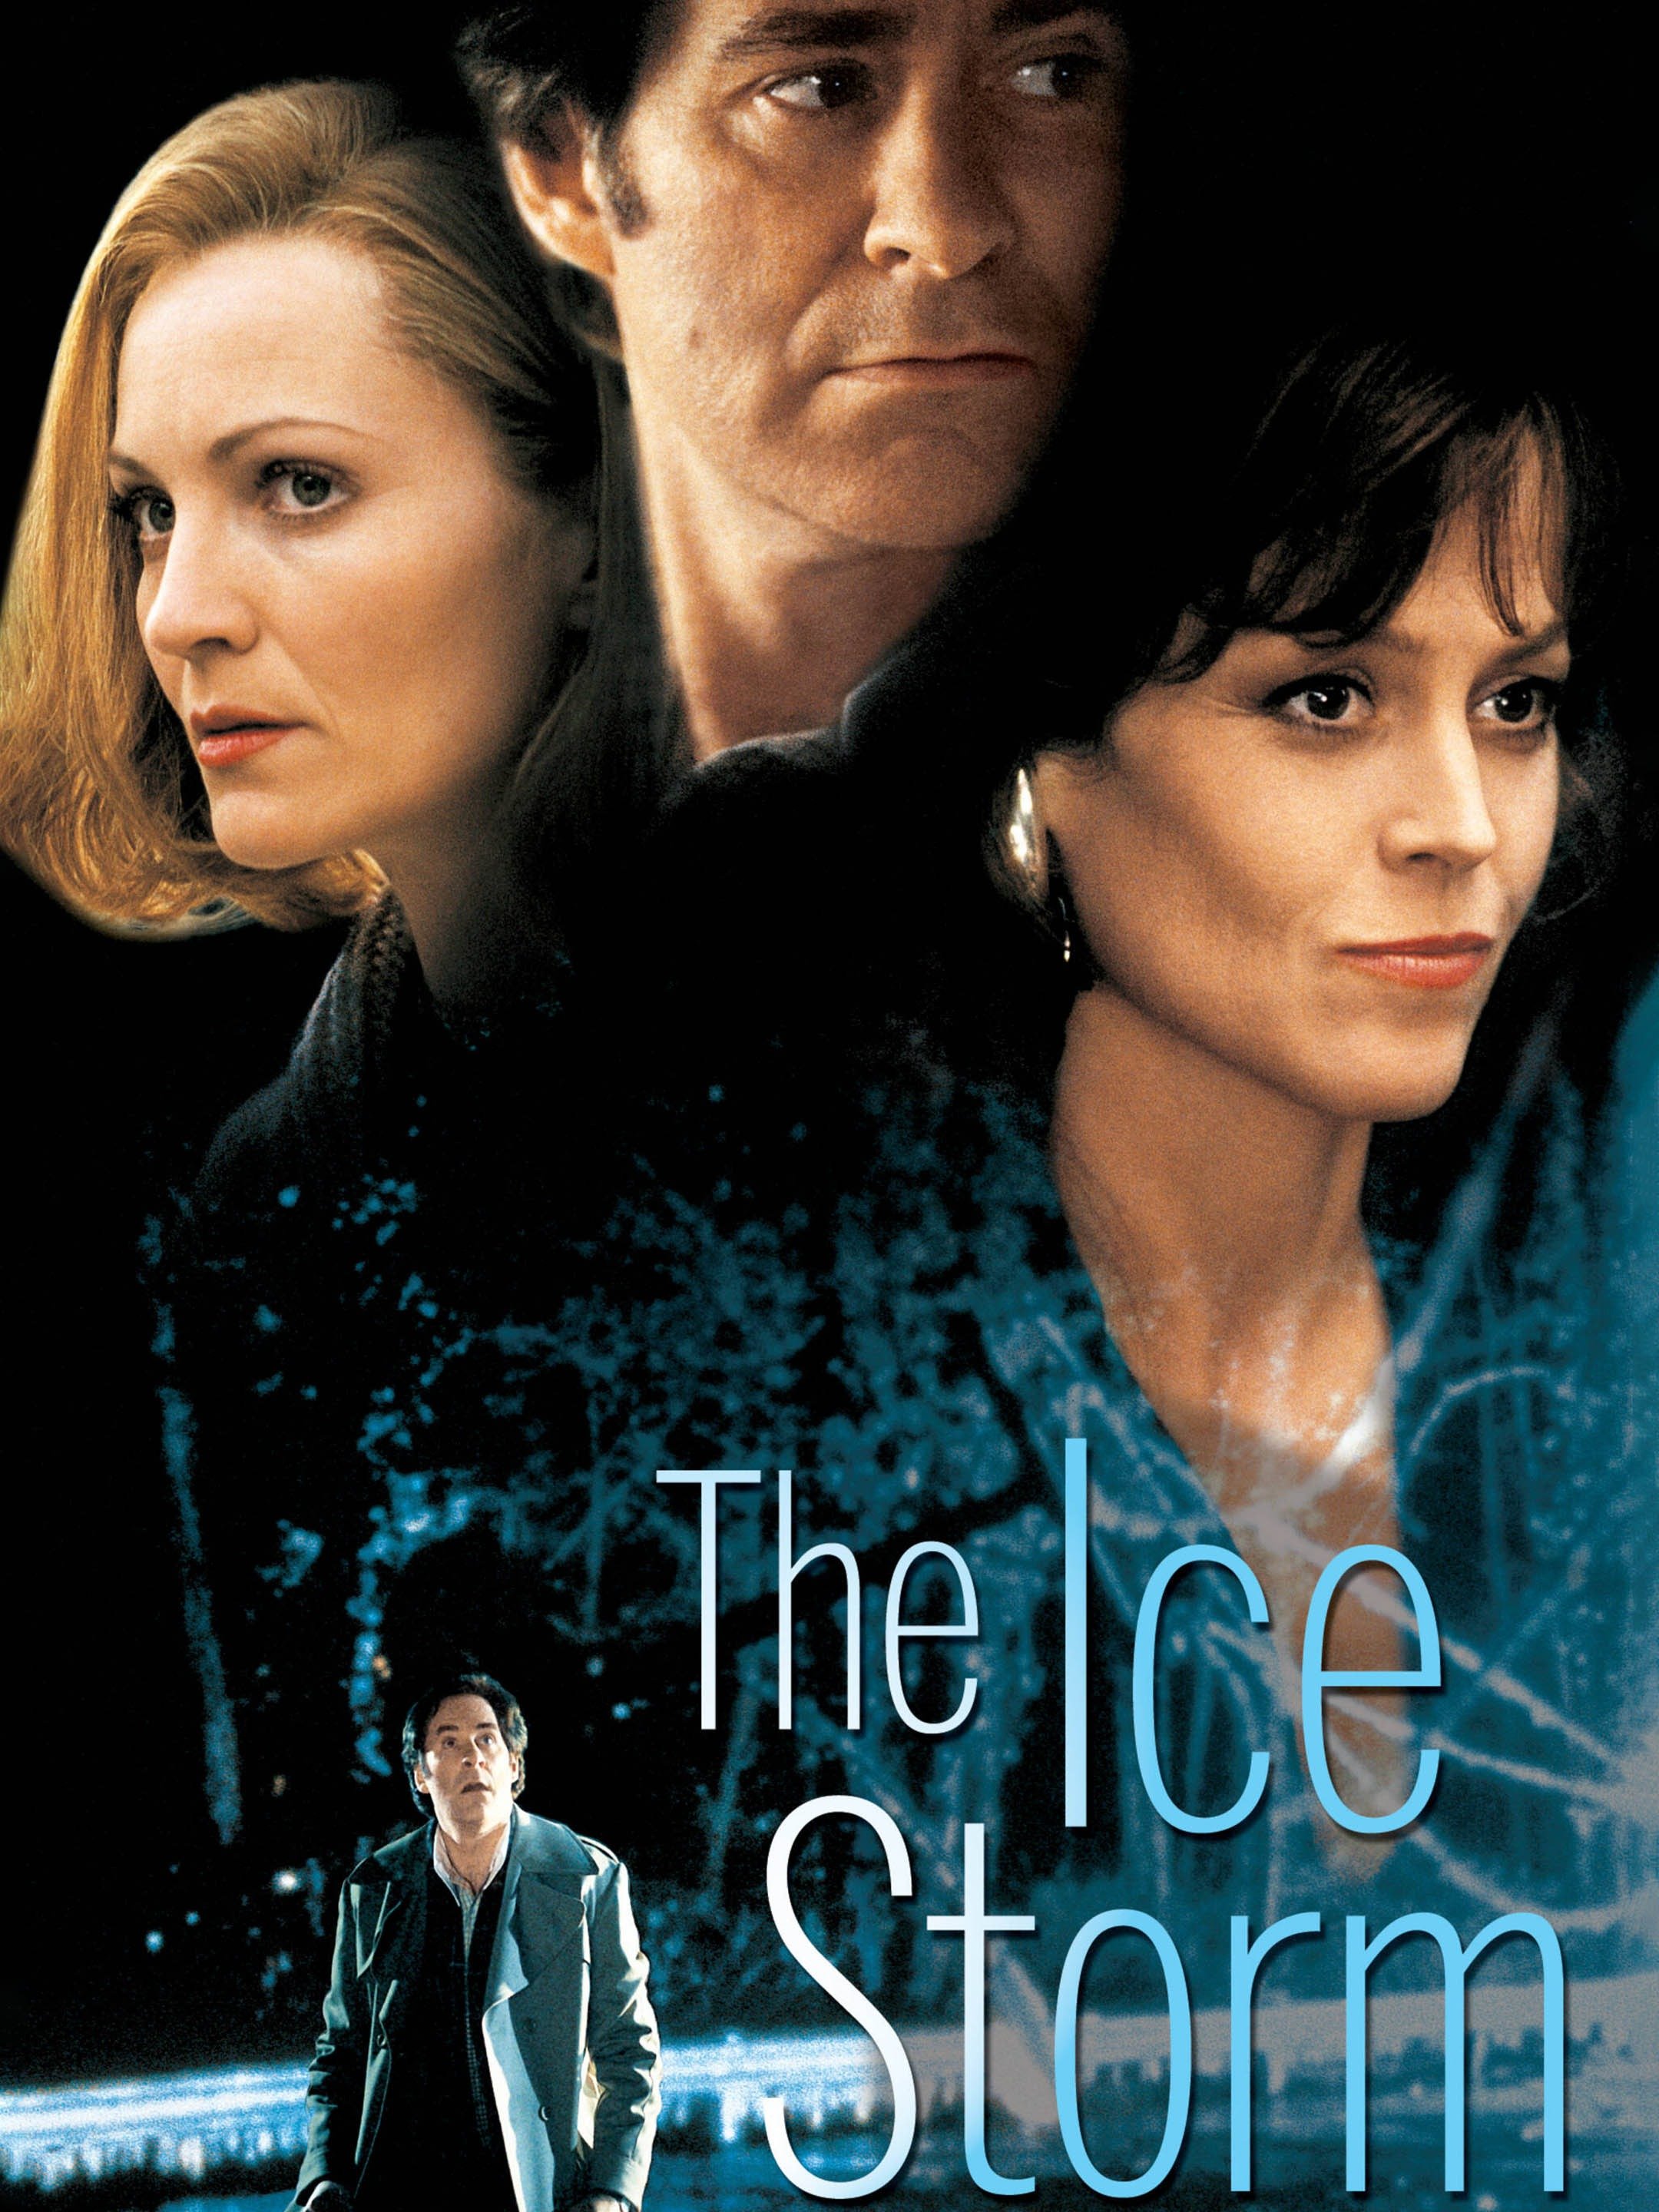 The Ice Storm Trailer 1 Trailers & Videos Rotten Tomatoes